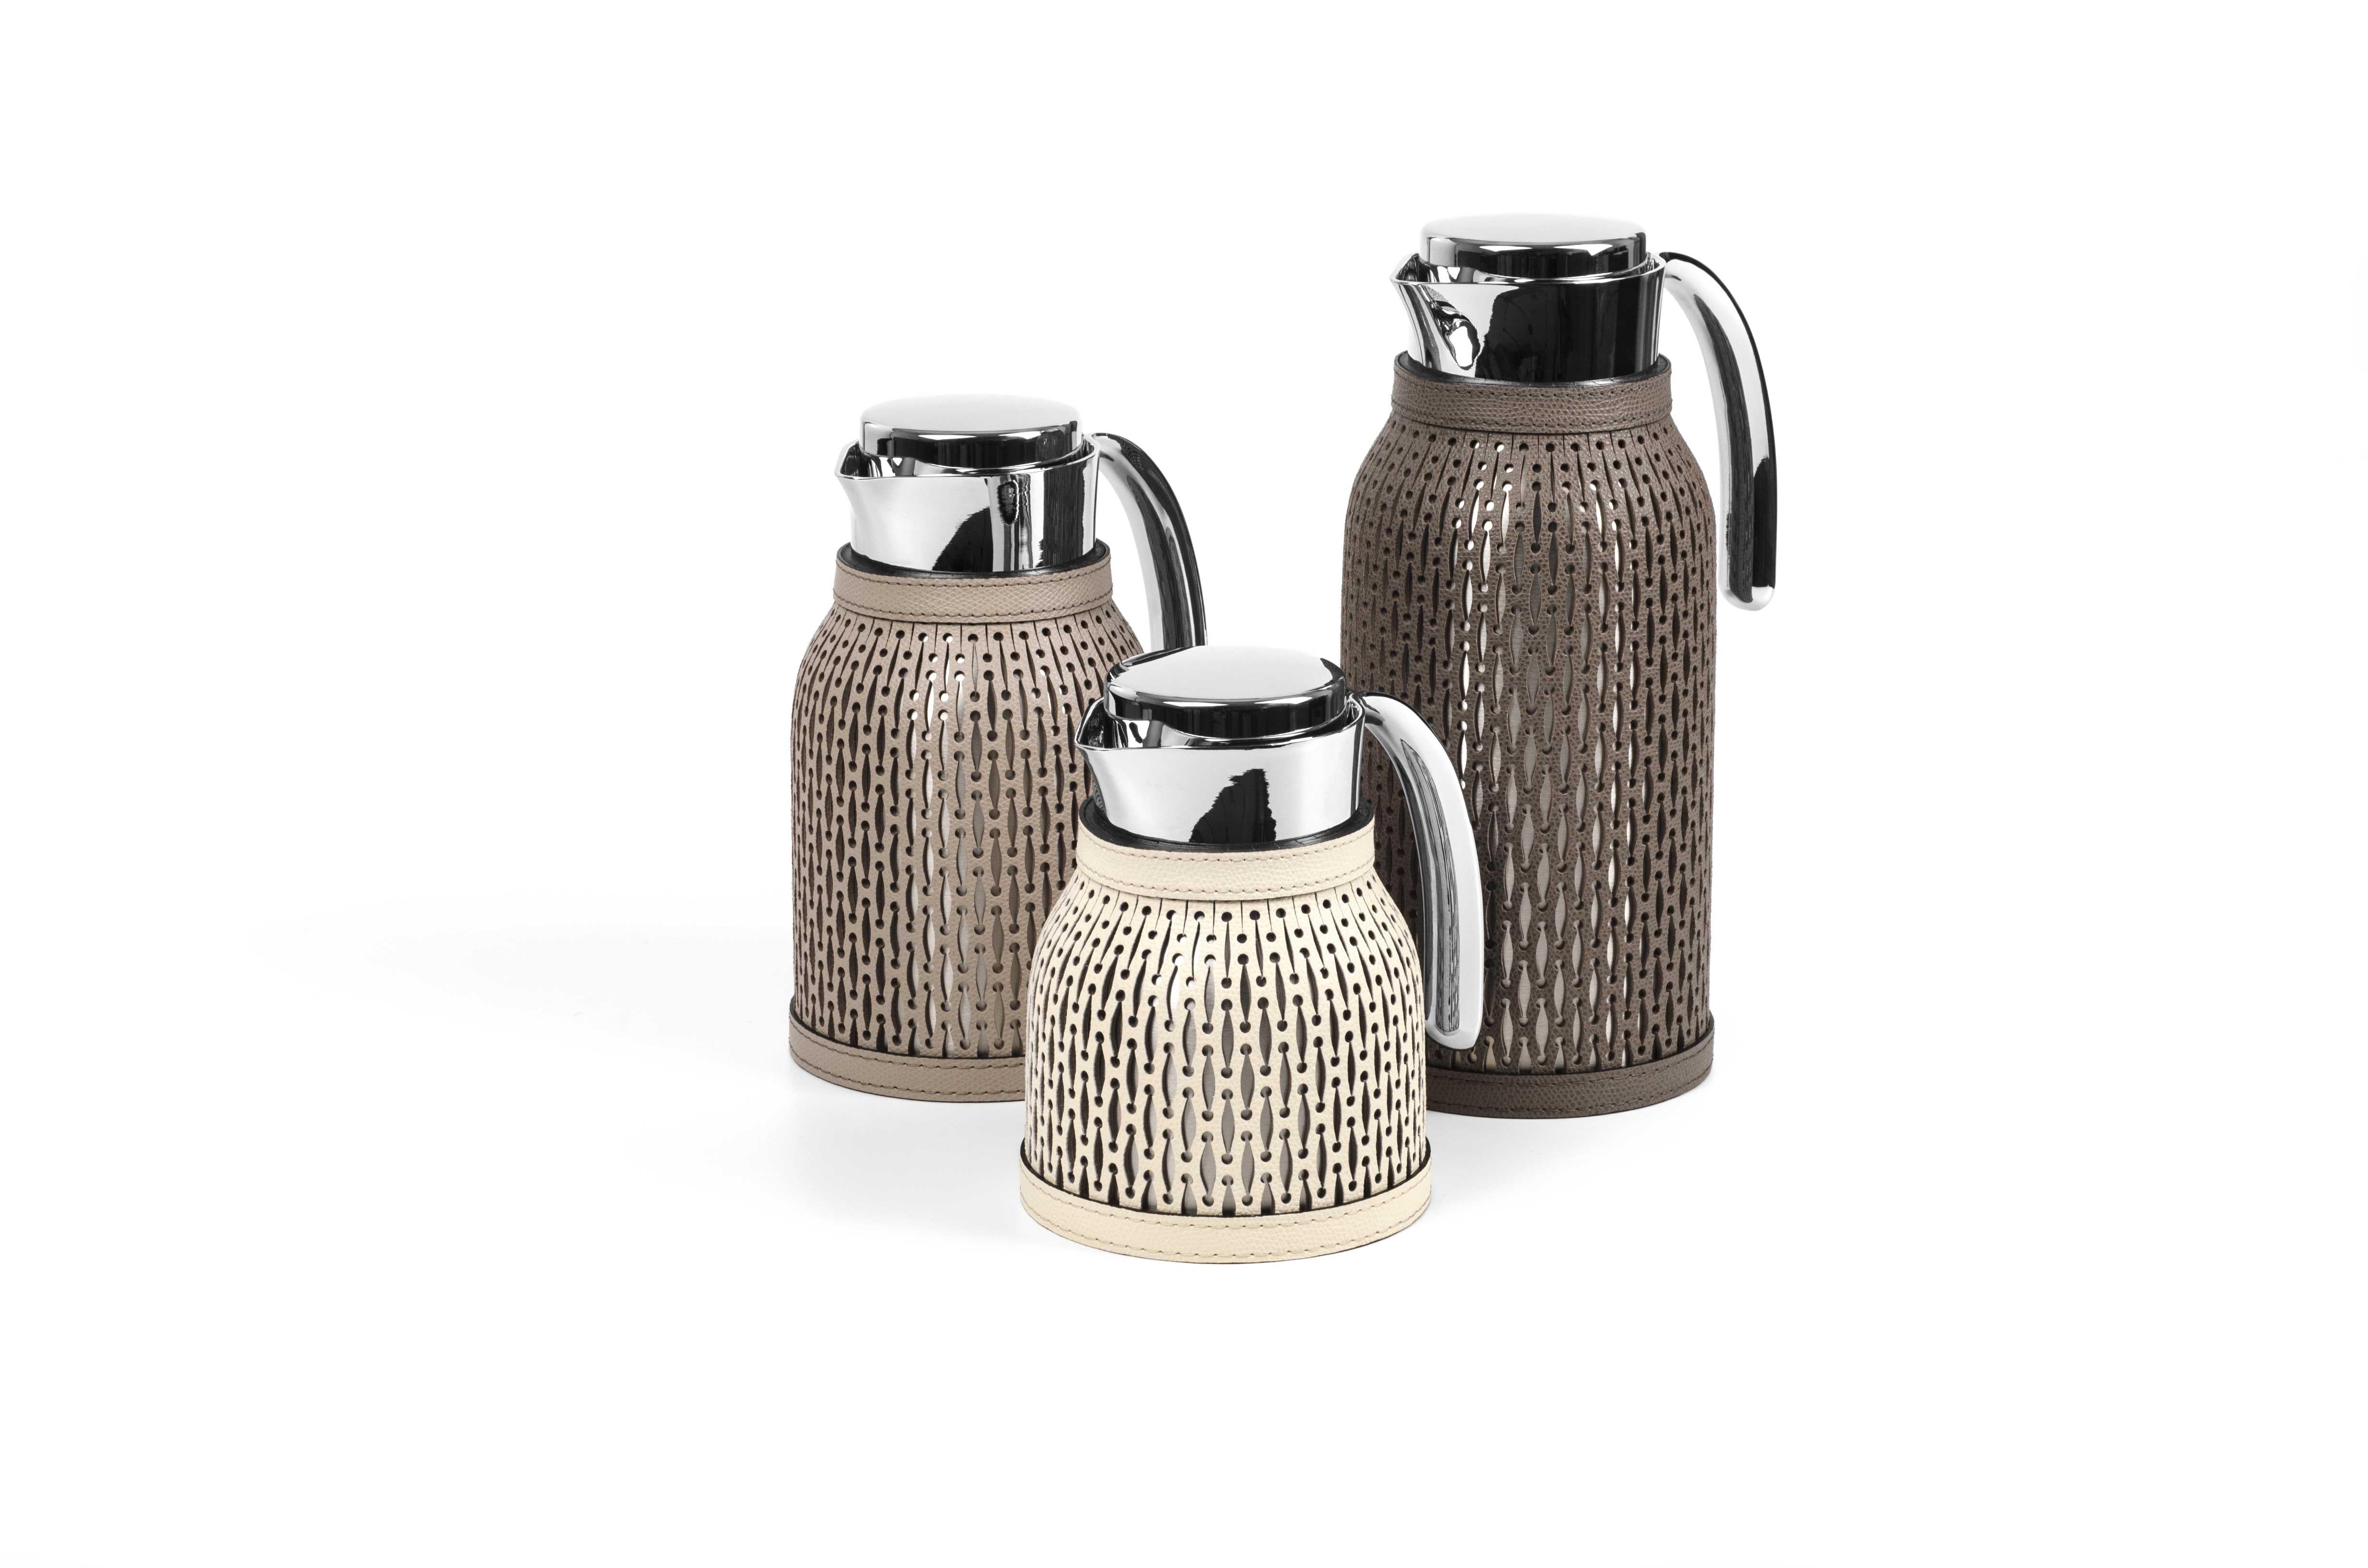 A new style with a brand new laser cut pattern that beautifully finishes the elegant leather cover.

Diana is our new steel thermal carafe with a capacity of 600ml, 1L and 1,5L, featuring a practical button closure that allows an easy removal of